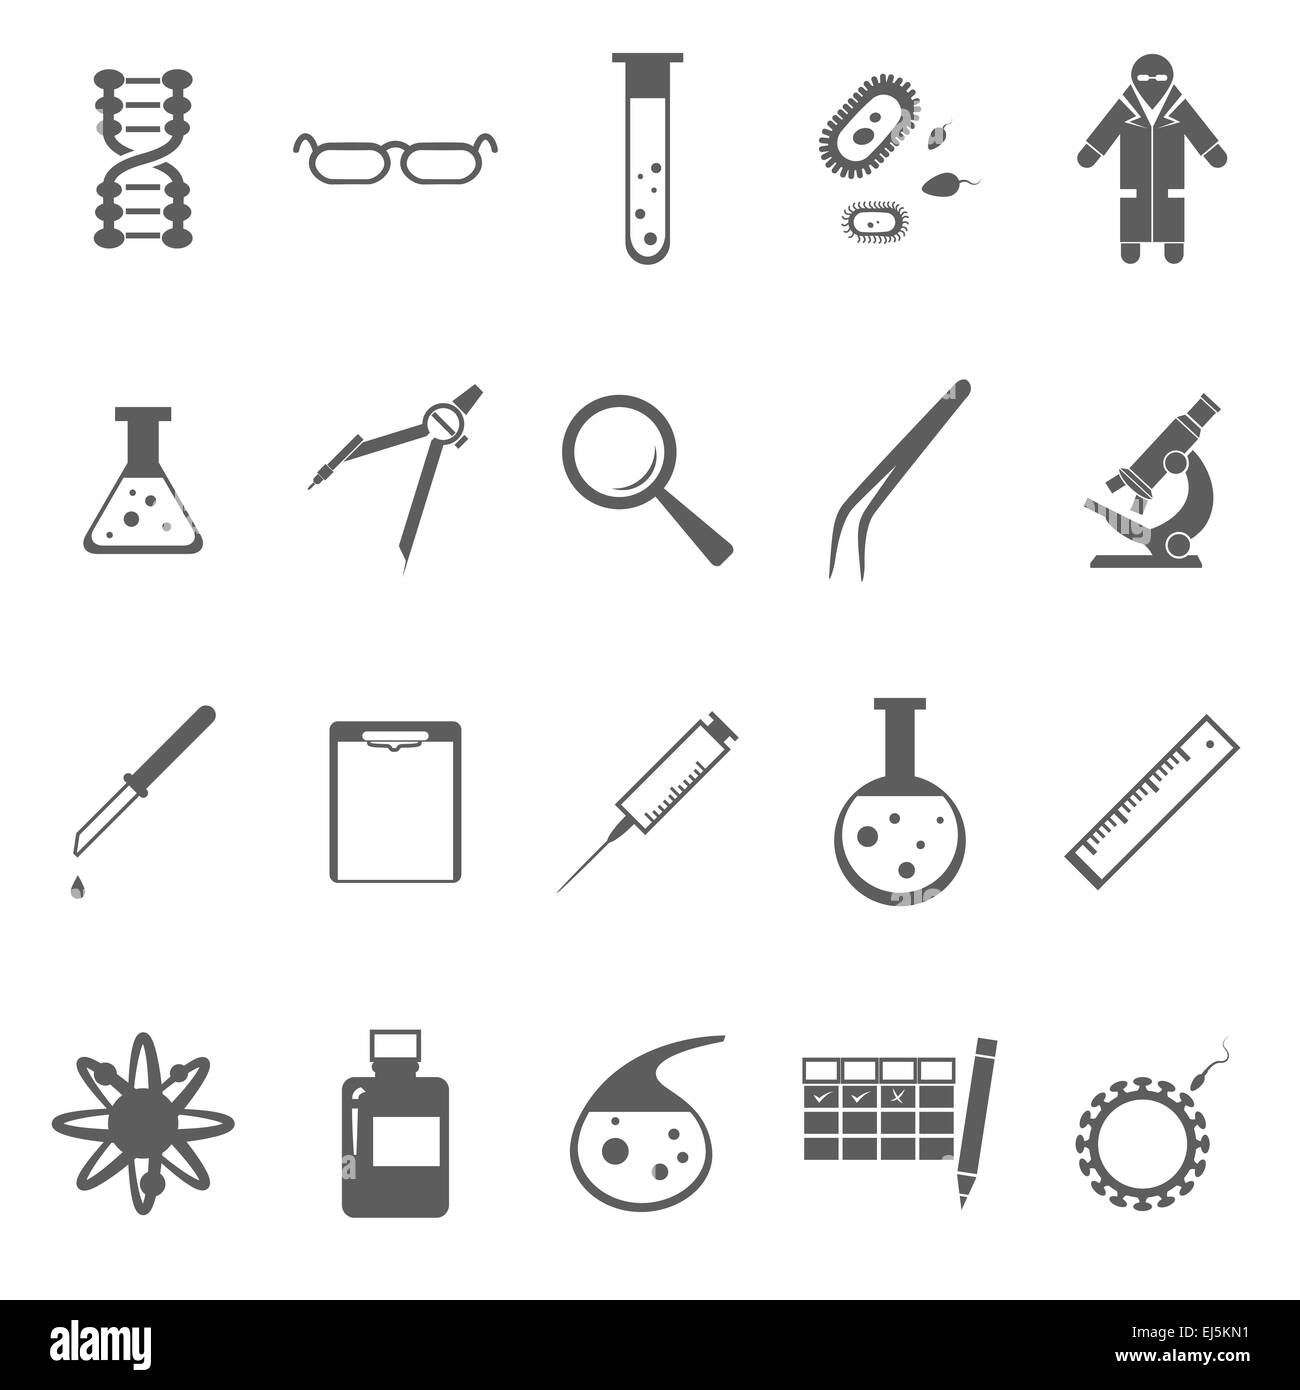 Vector image of set of Genetic gray icons Stock Photo